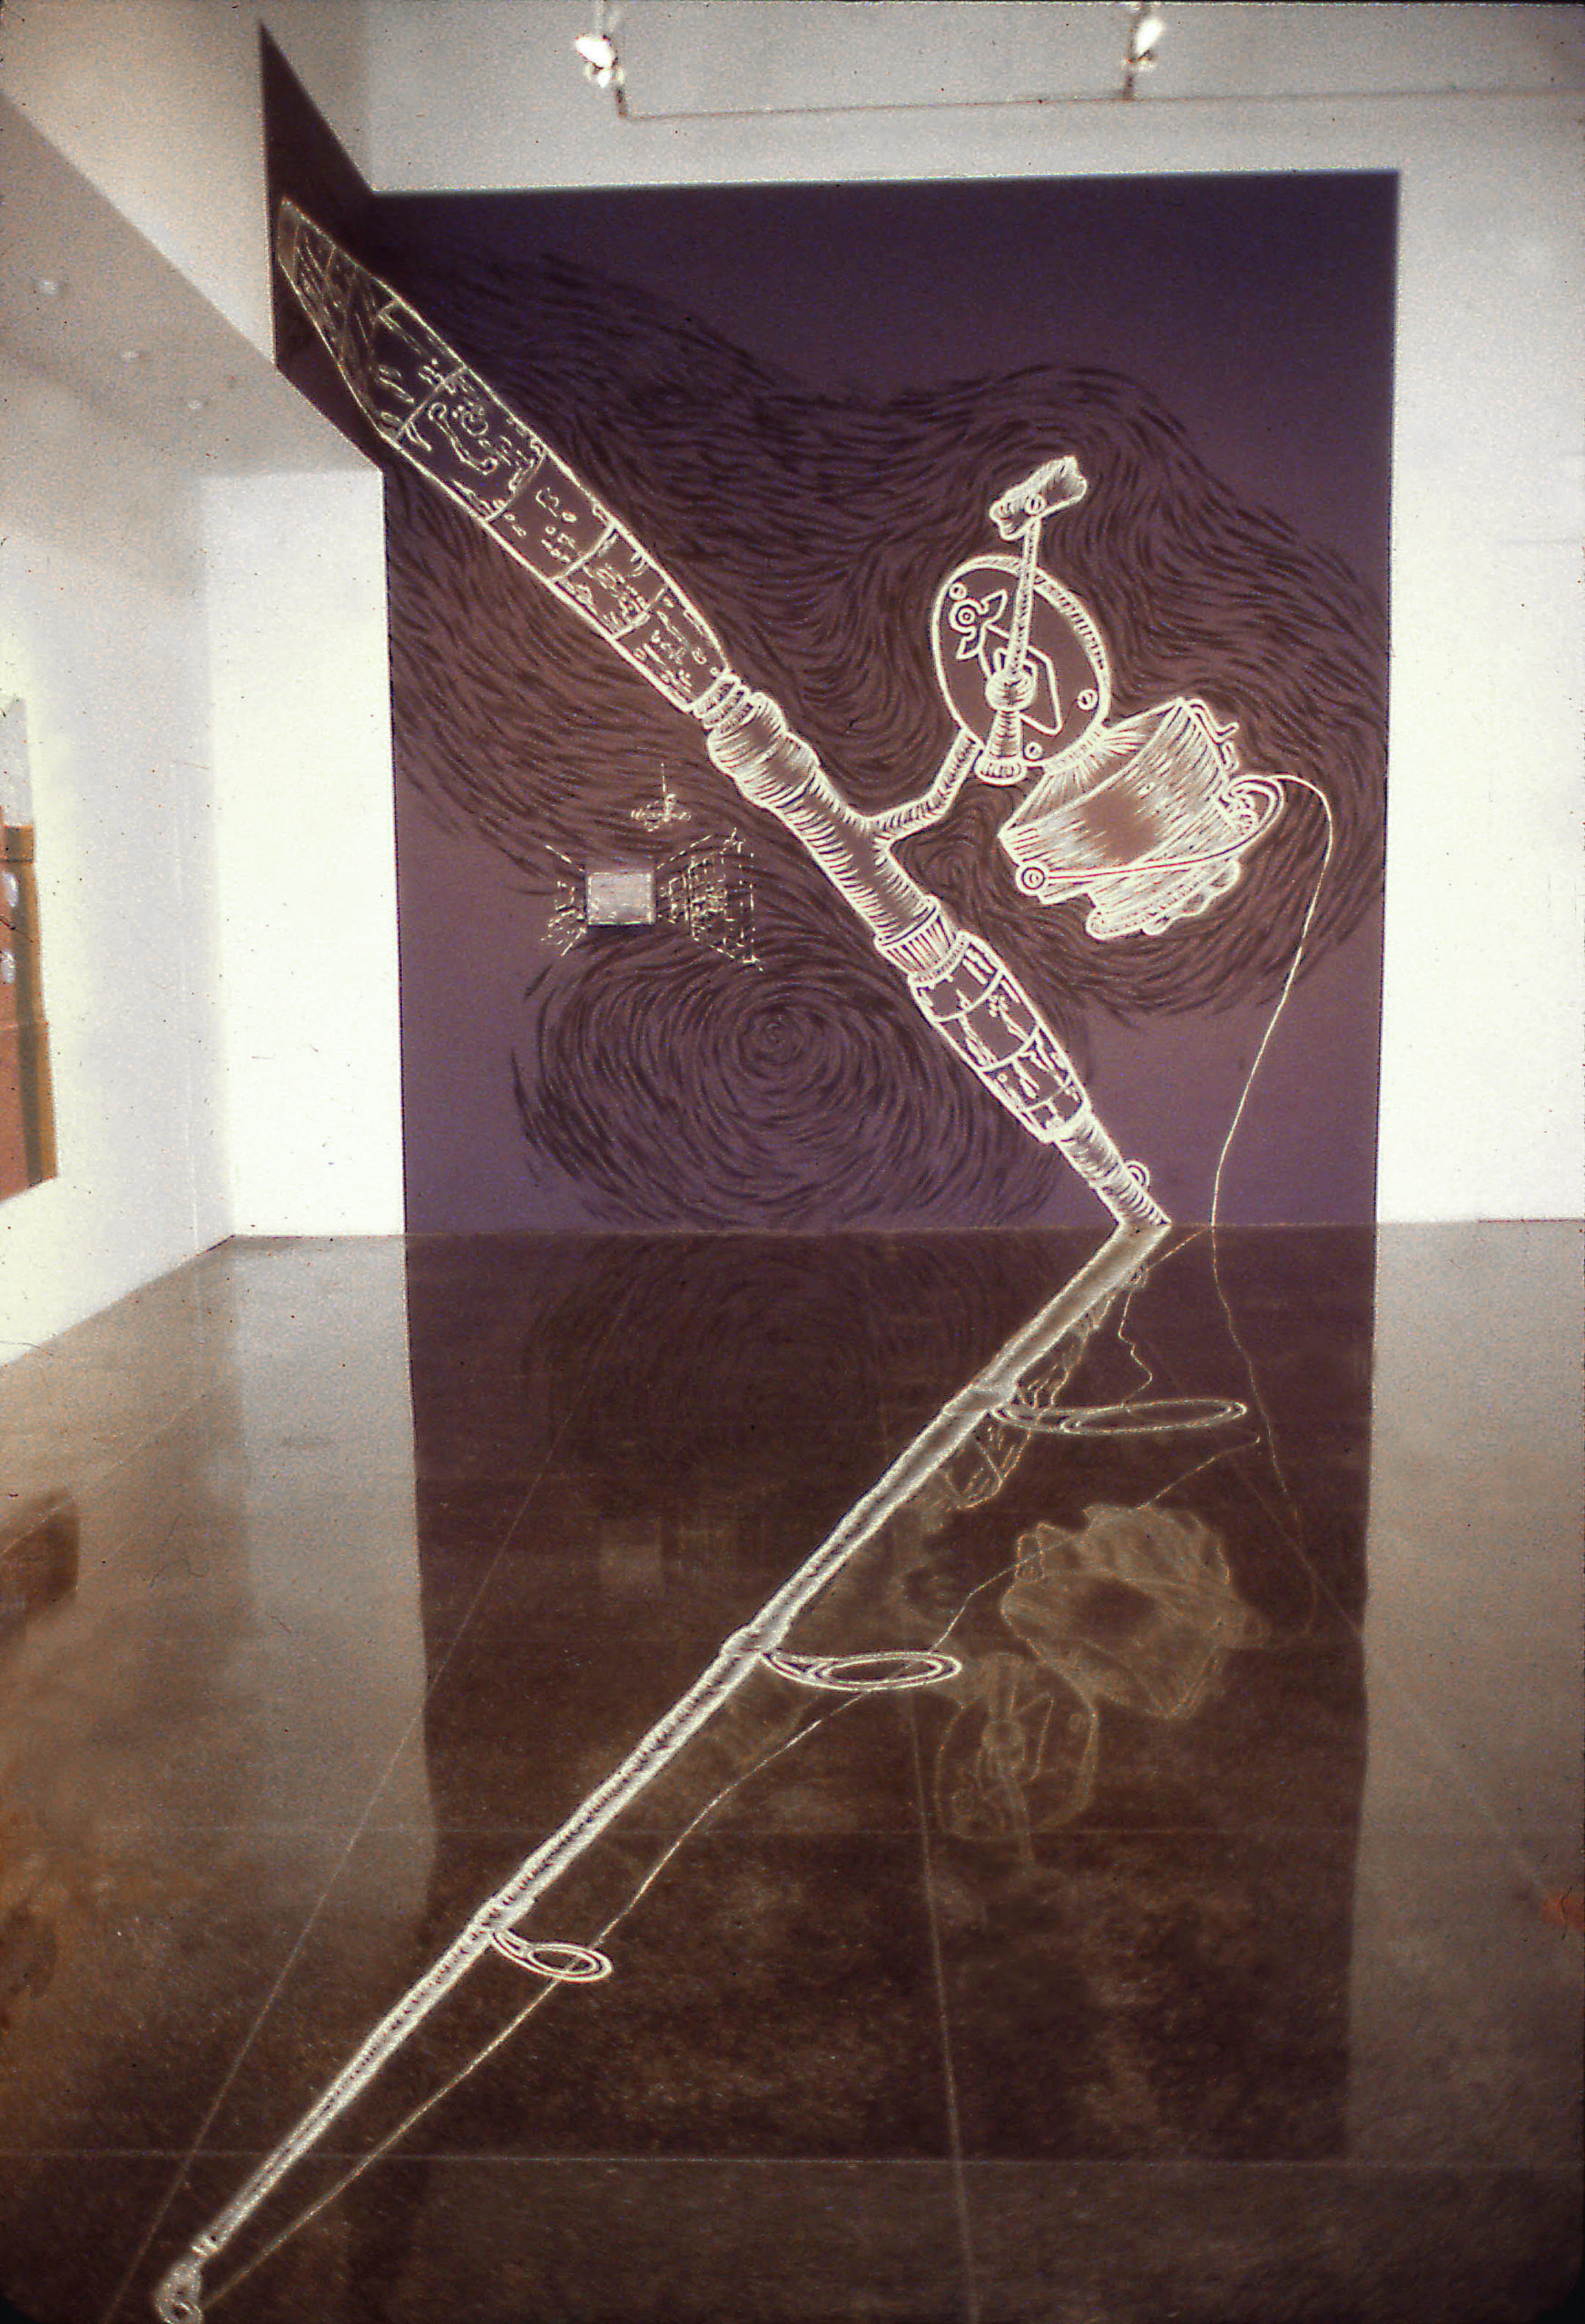 Casting, installation view, 2006, acrylic, latex